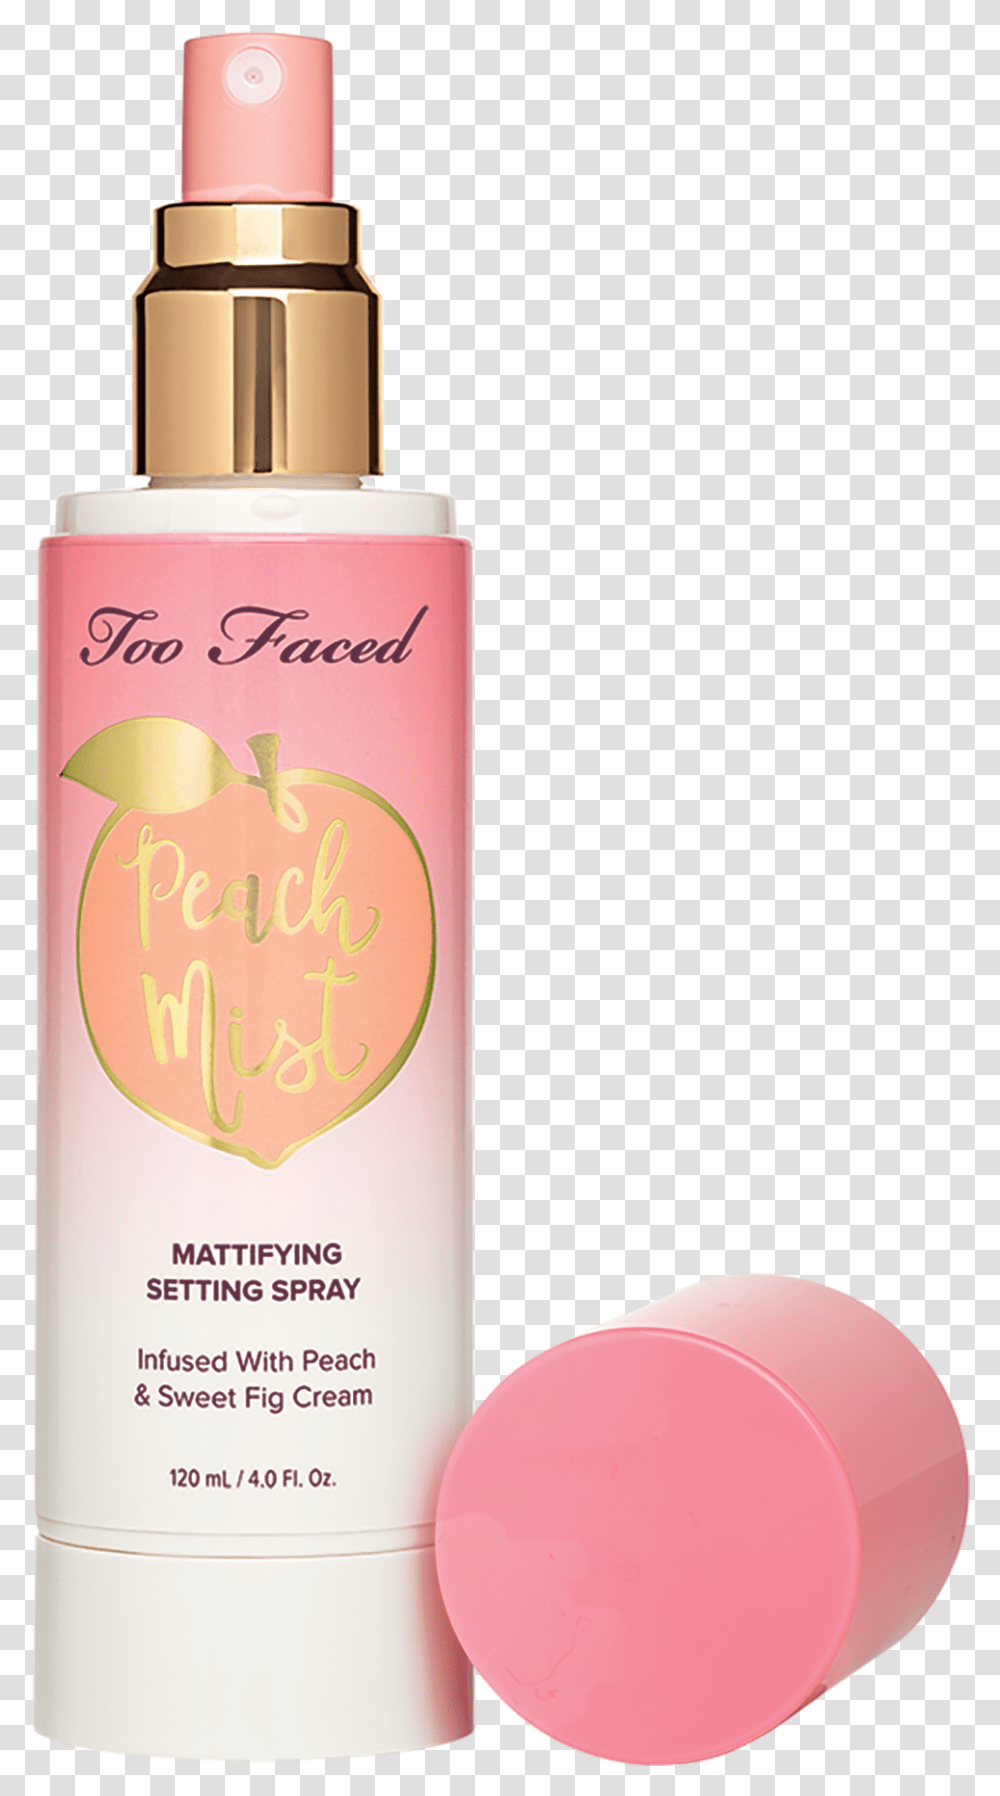 Too Faced Peach Mist, Bottle, Cosmetics, Shampoo, Lotion Transparent Png